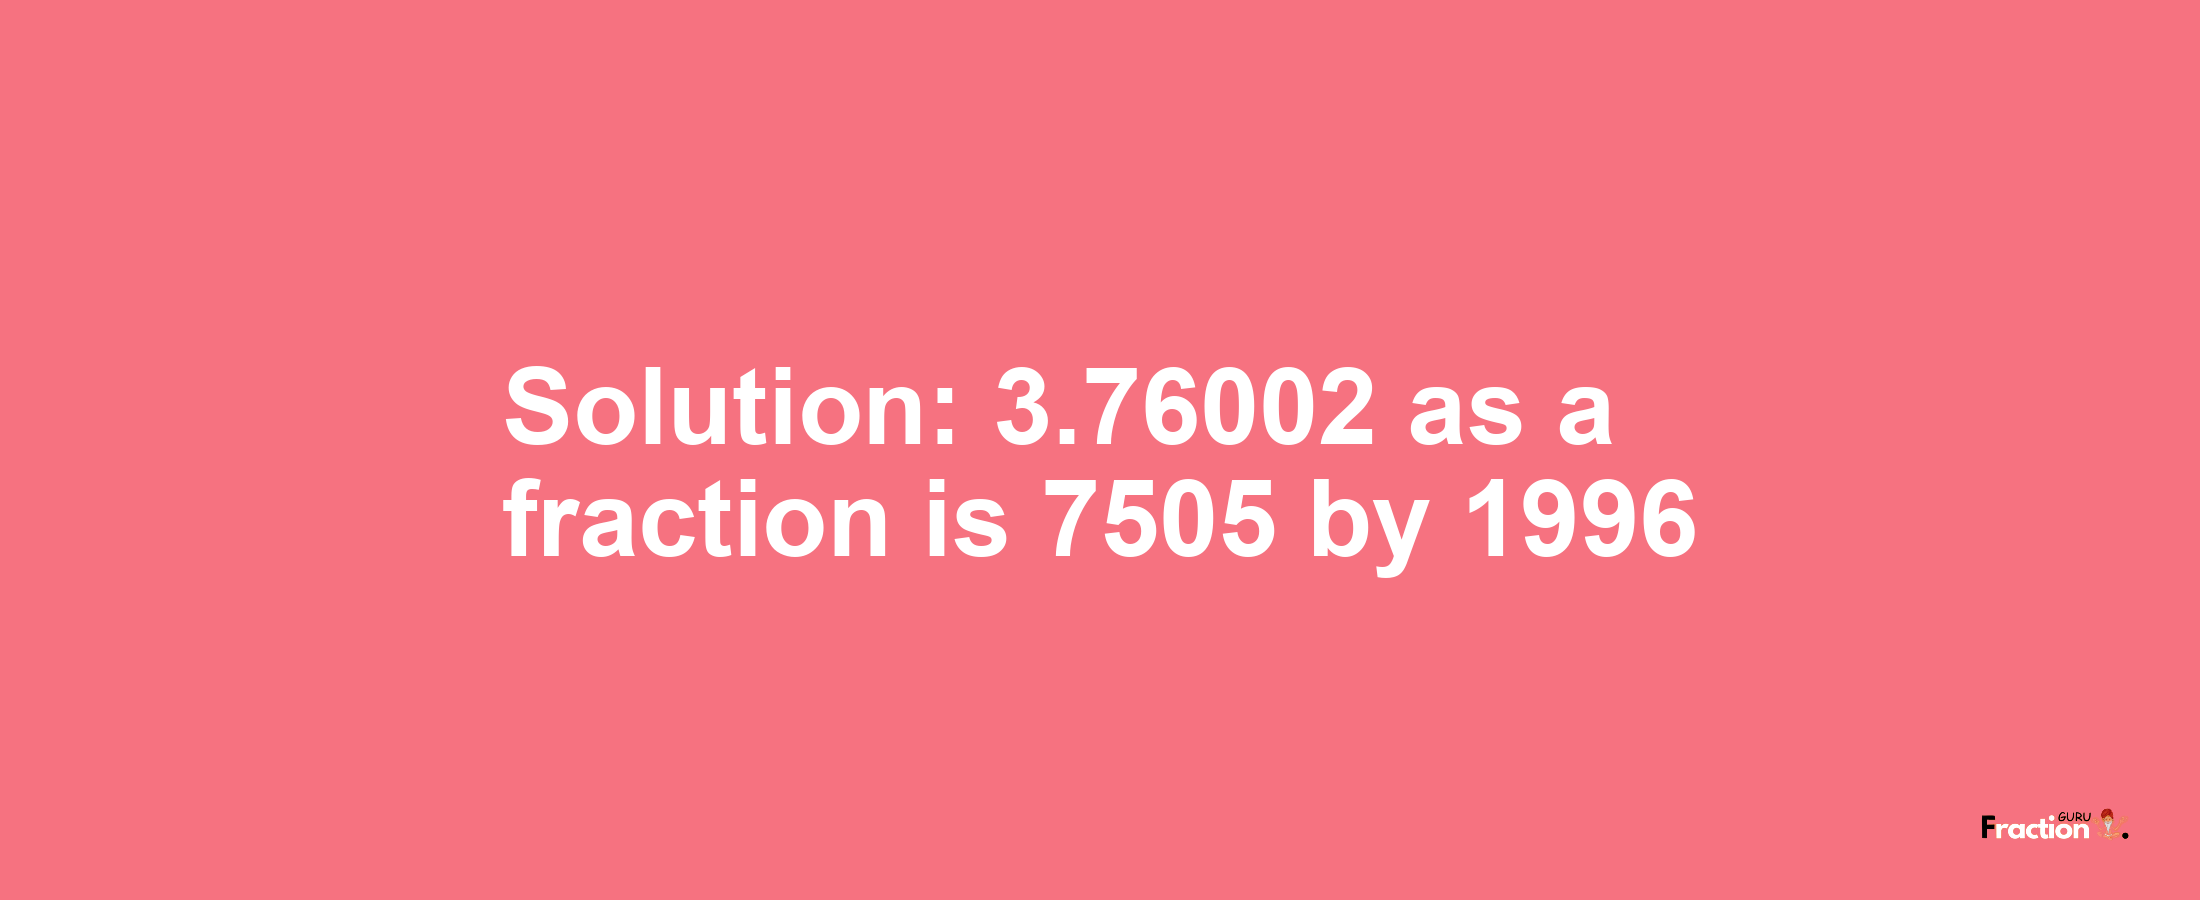 Solution:3.76002 as a fraction is 7505/1996